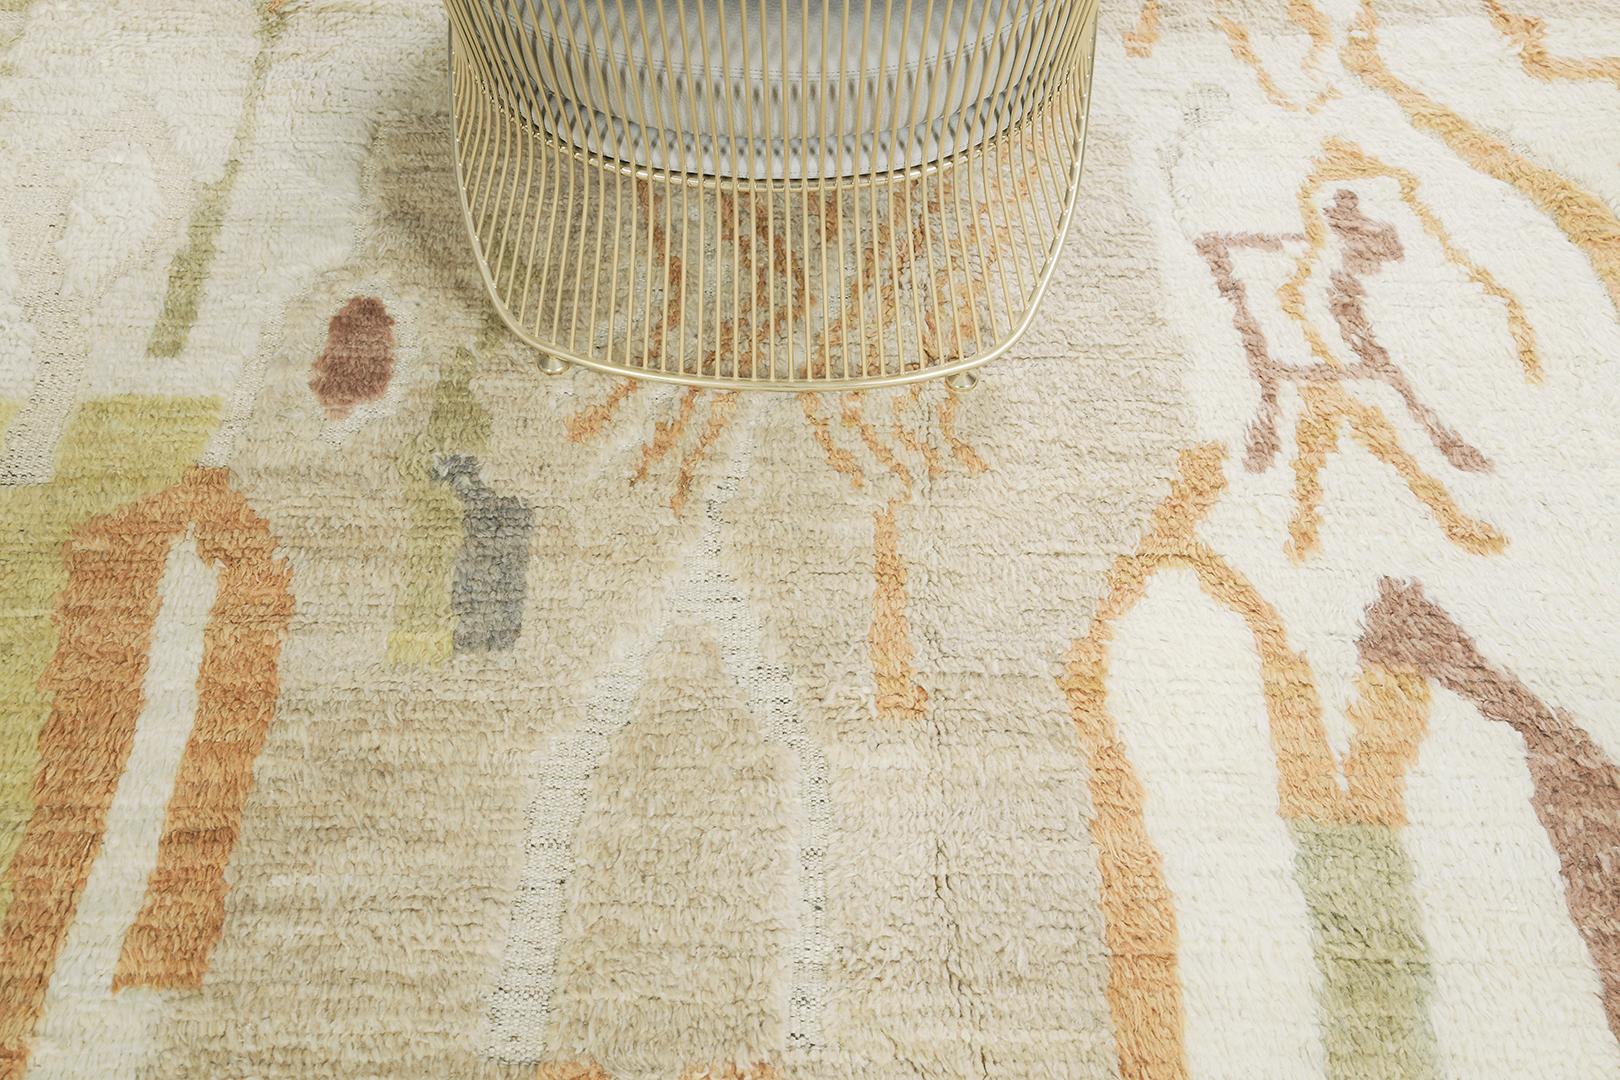 Rikasa is a luxurious wool with amorphous shapes in subtle gradations of cider orange, bronze and ivory. Its embossed handwoven wool features a series of free-spirited rugs that feels innately soft underfoot and is enhanced by extraordinary, valiant